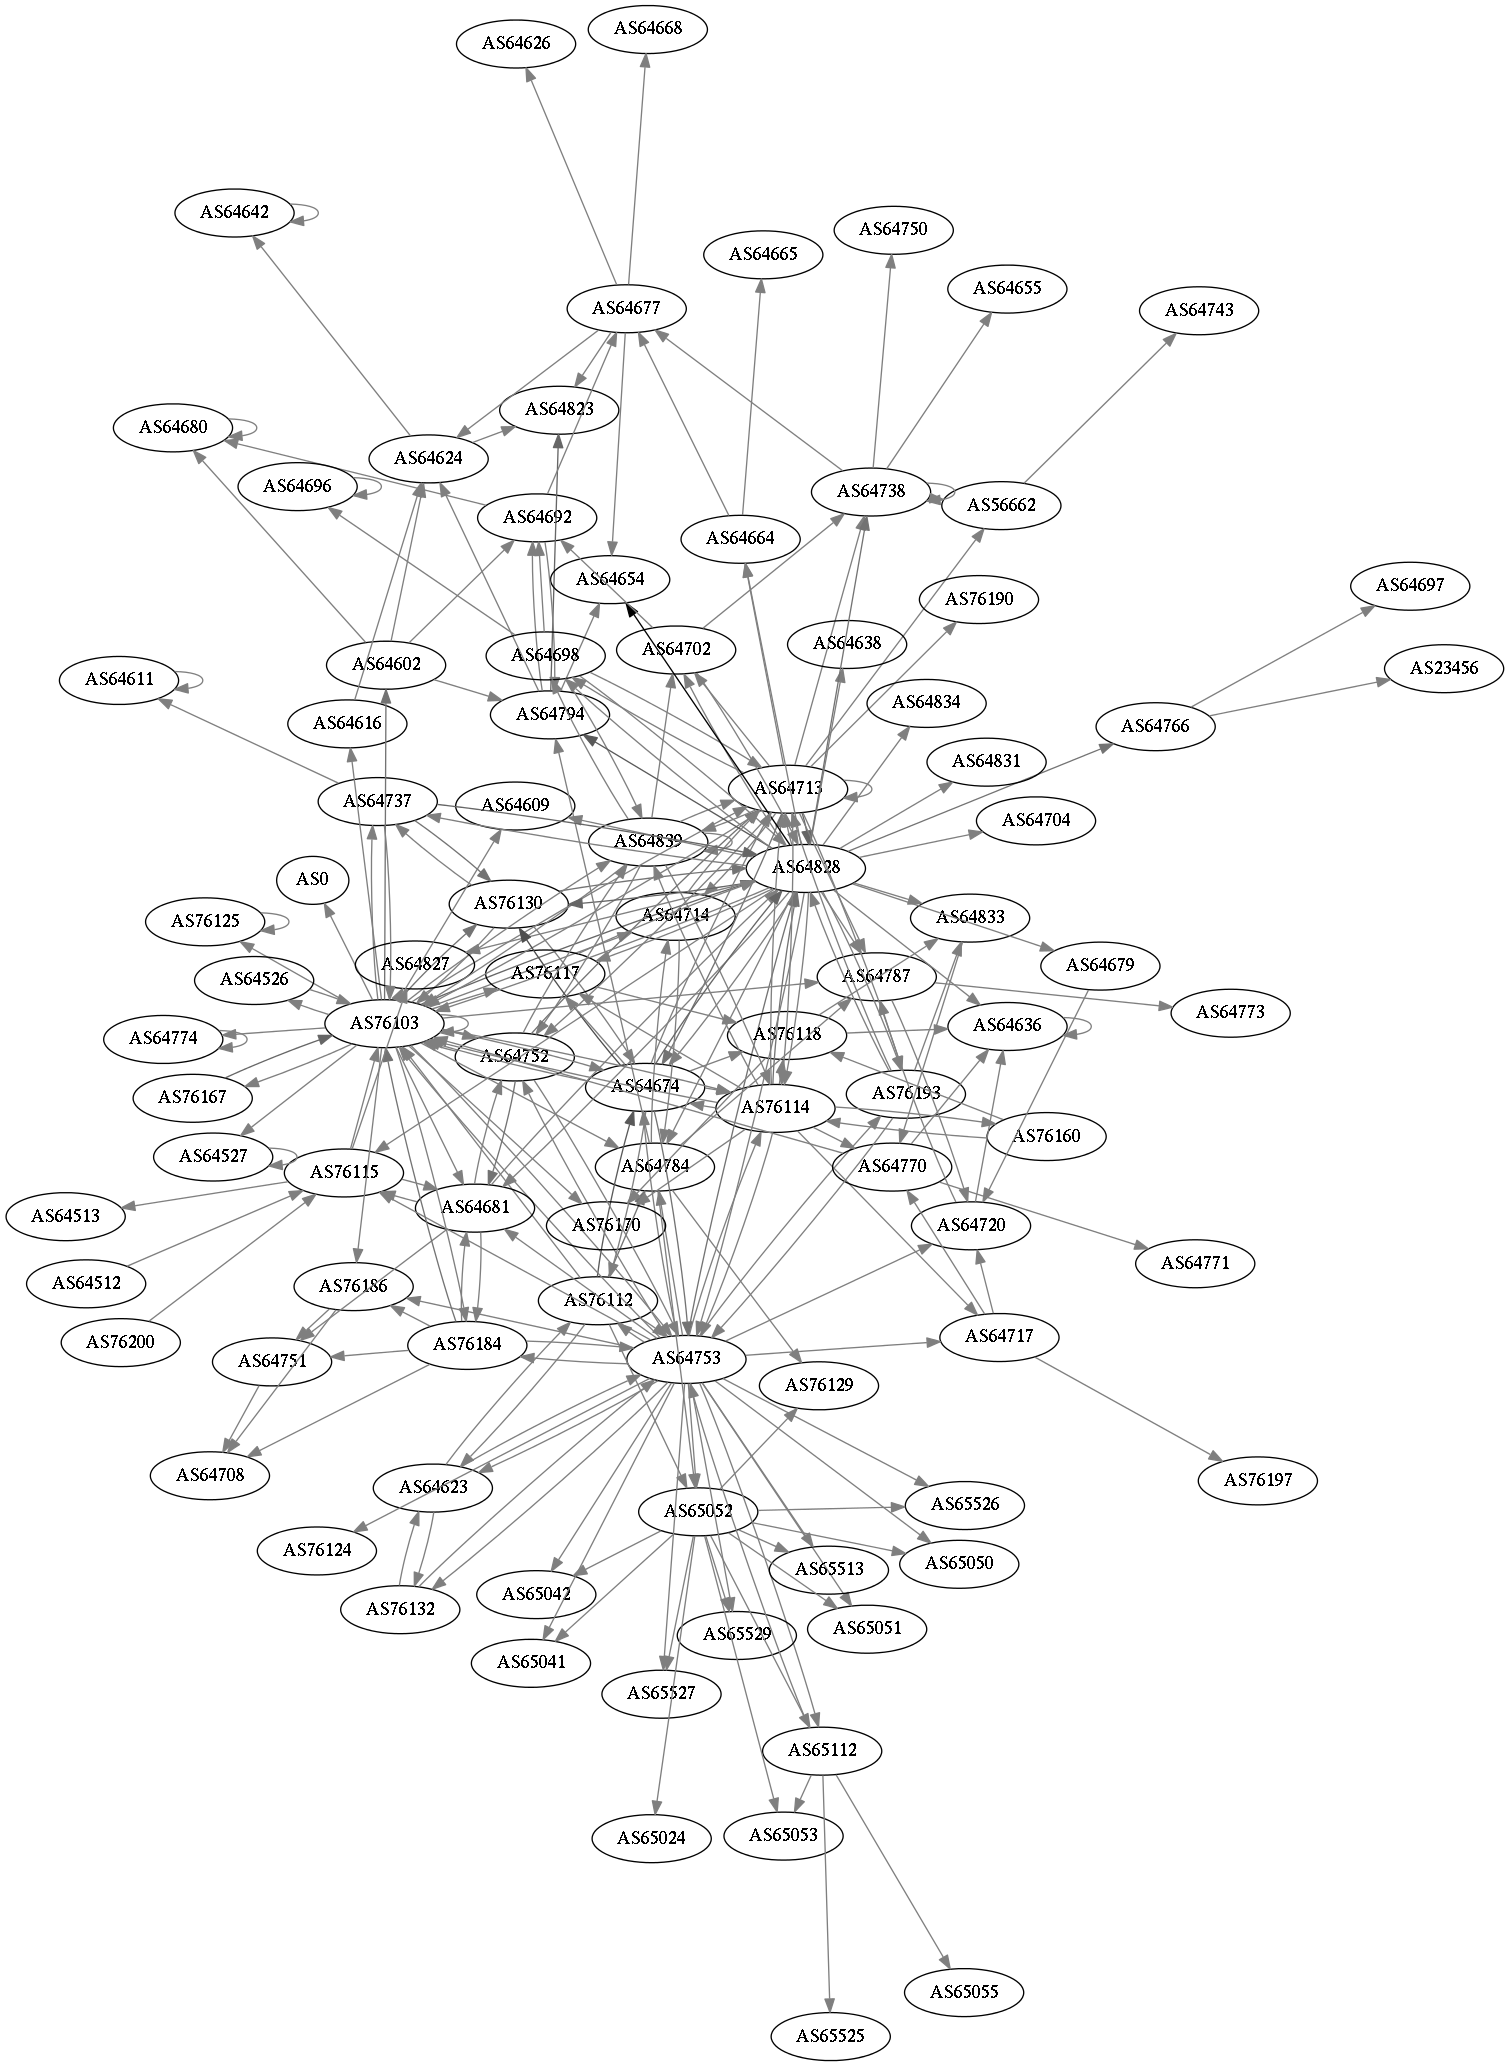 ../_images/peering-graph.png